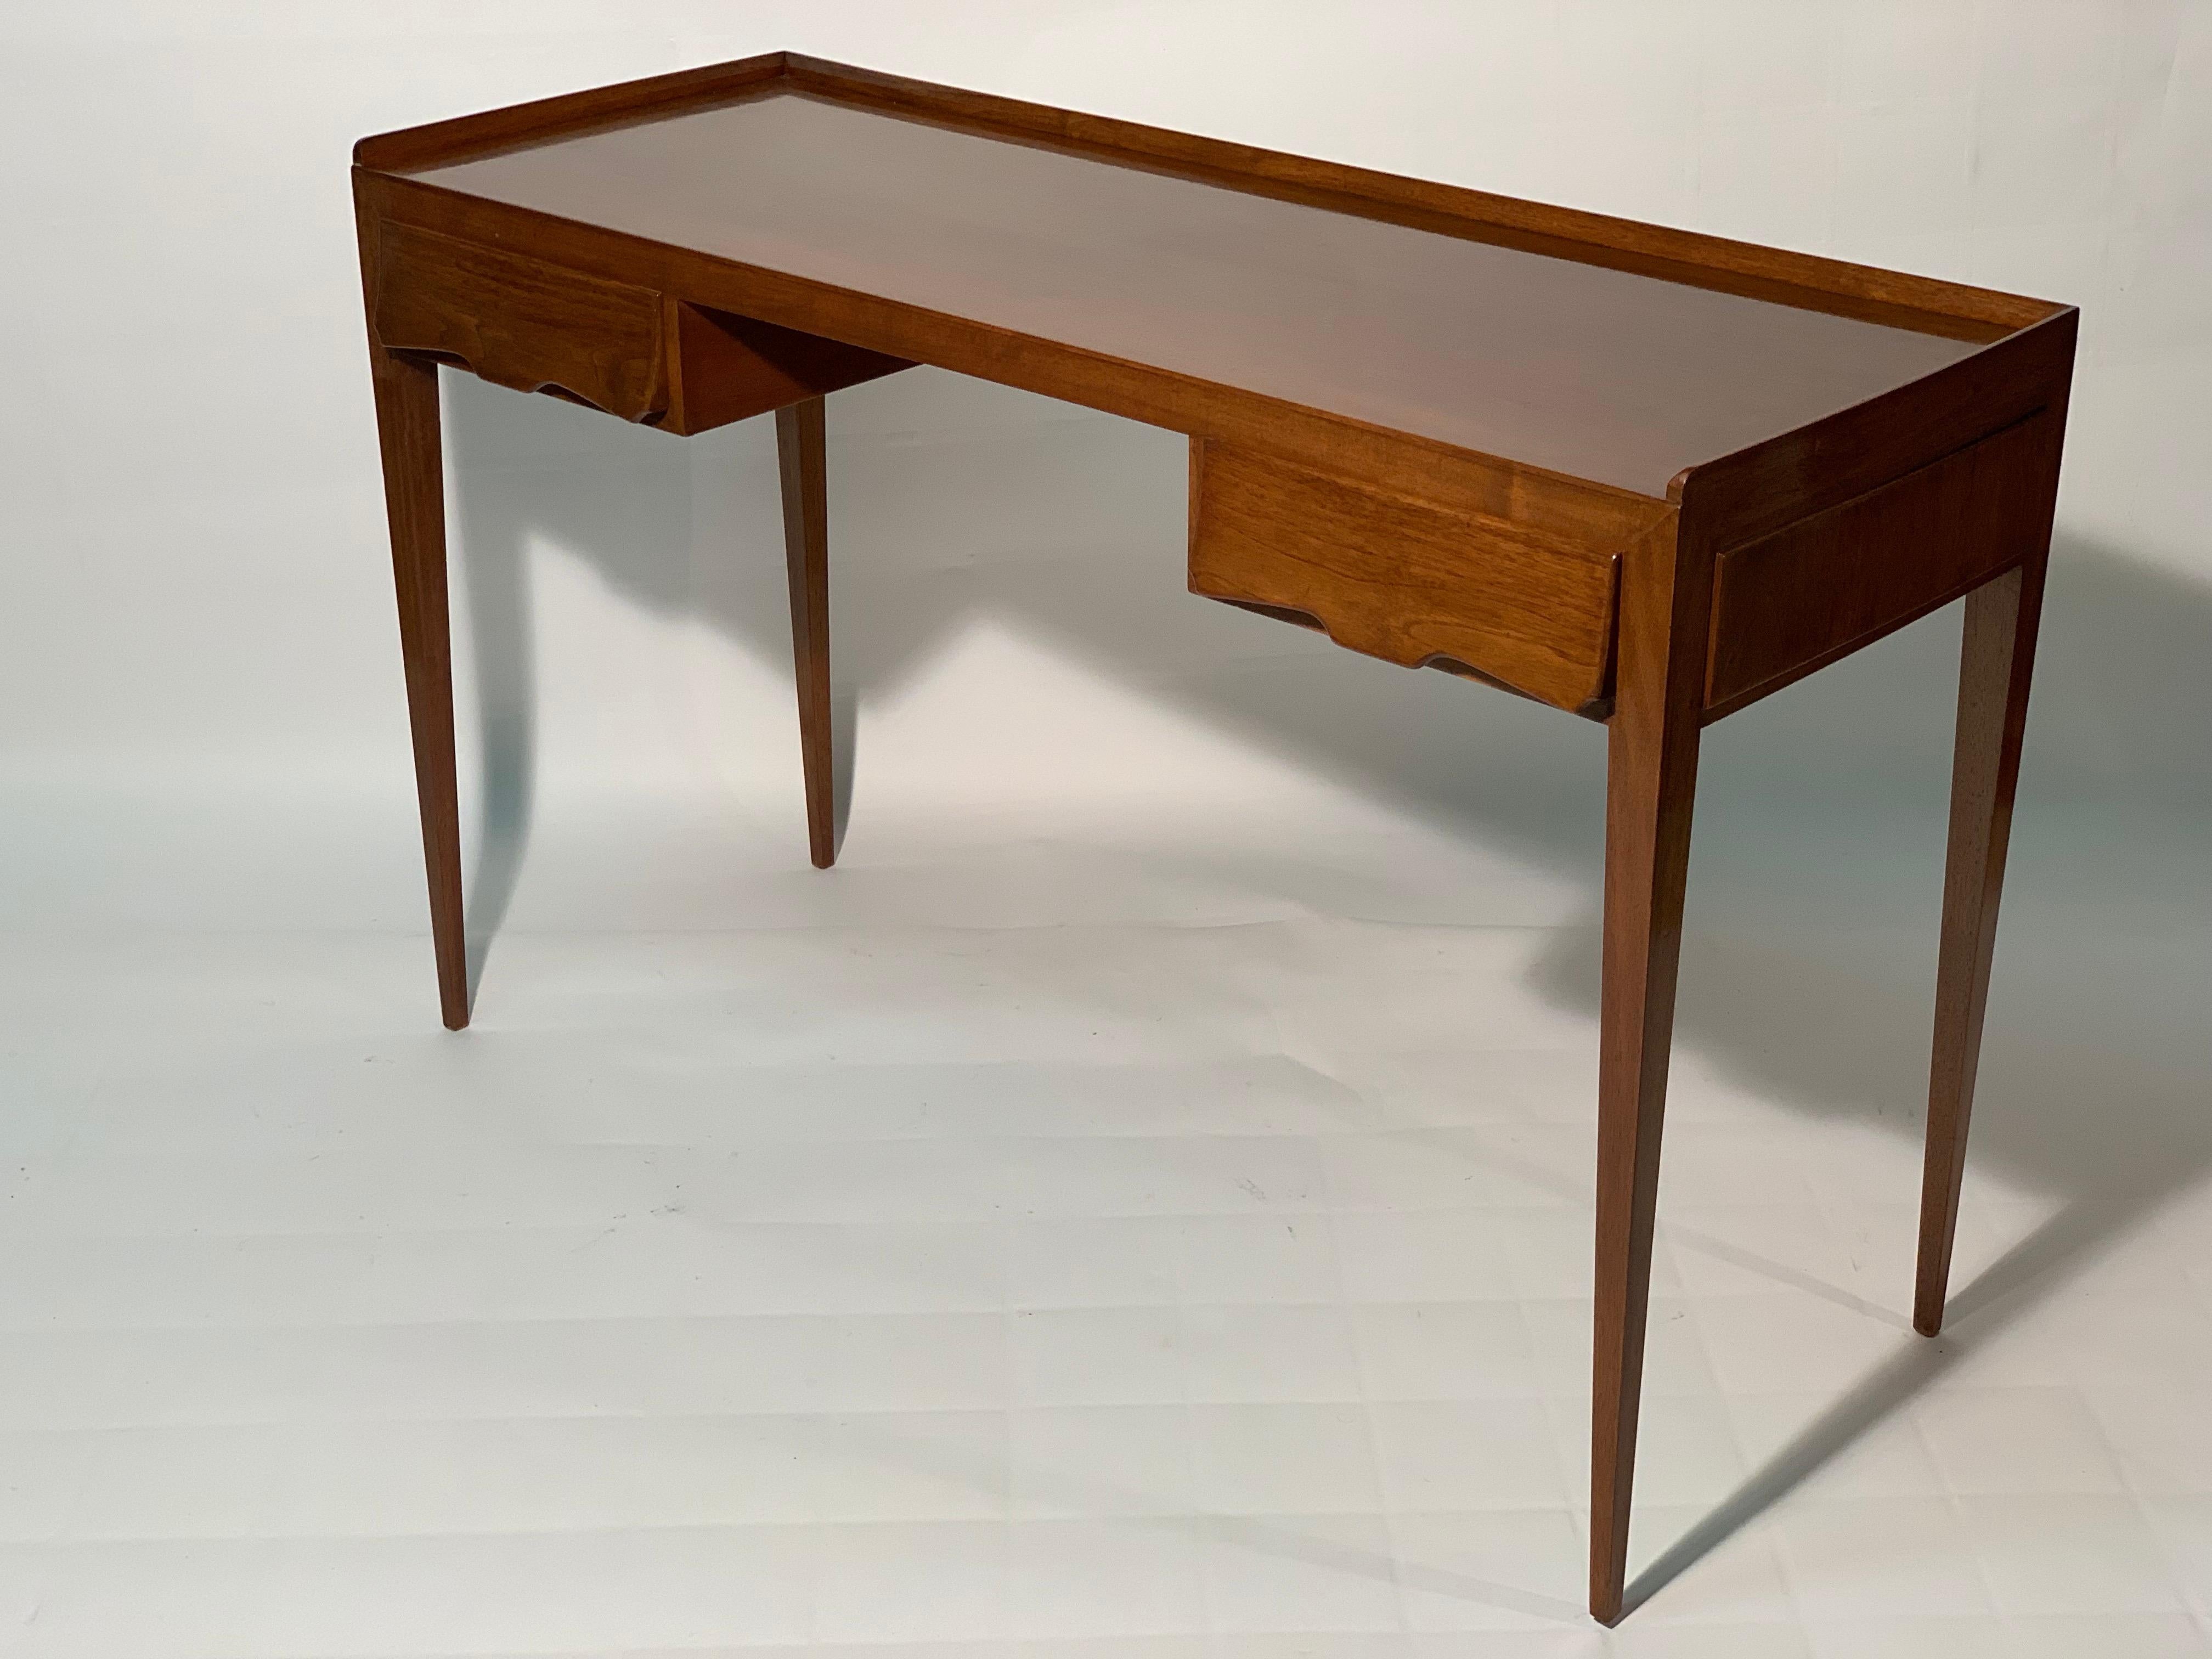 Elegant writing desk in natural walnut designed by the architect Paolo Malchiodi Firenze Italy at the end of the 1940's.
Four slender legs support a band with two shaped and sculpted drawers in solid walnut with a decoration handle.
This desk is